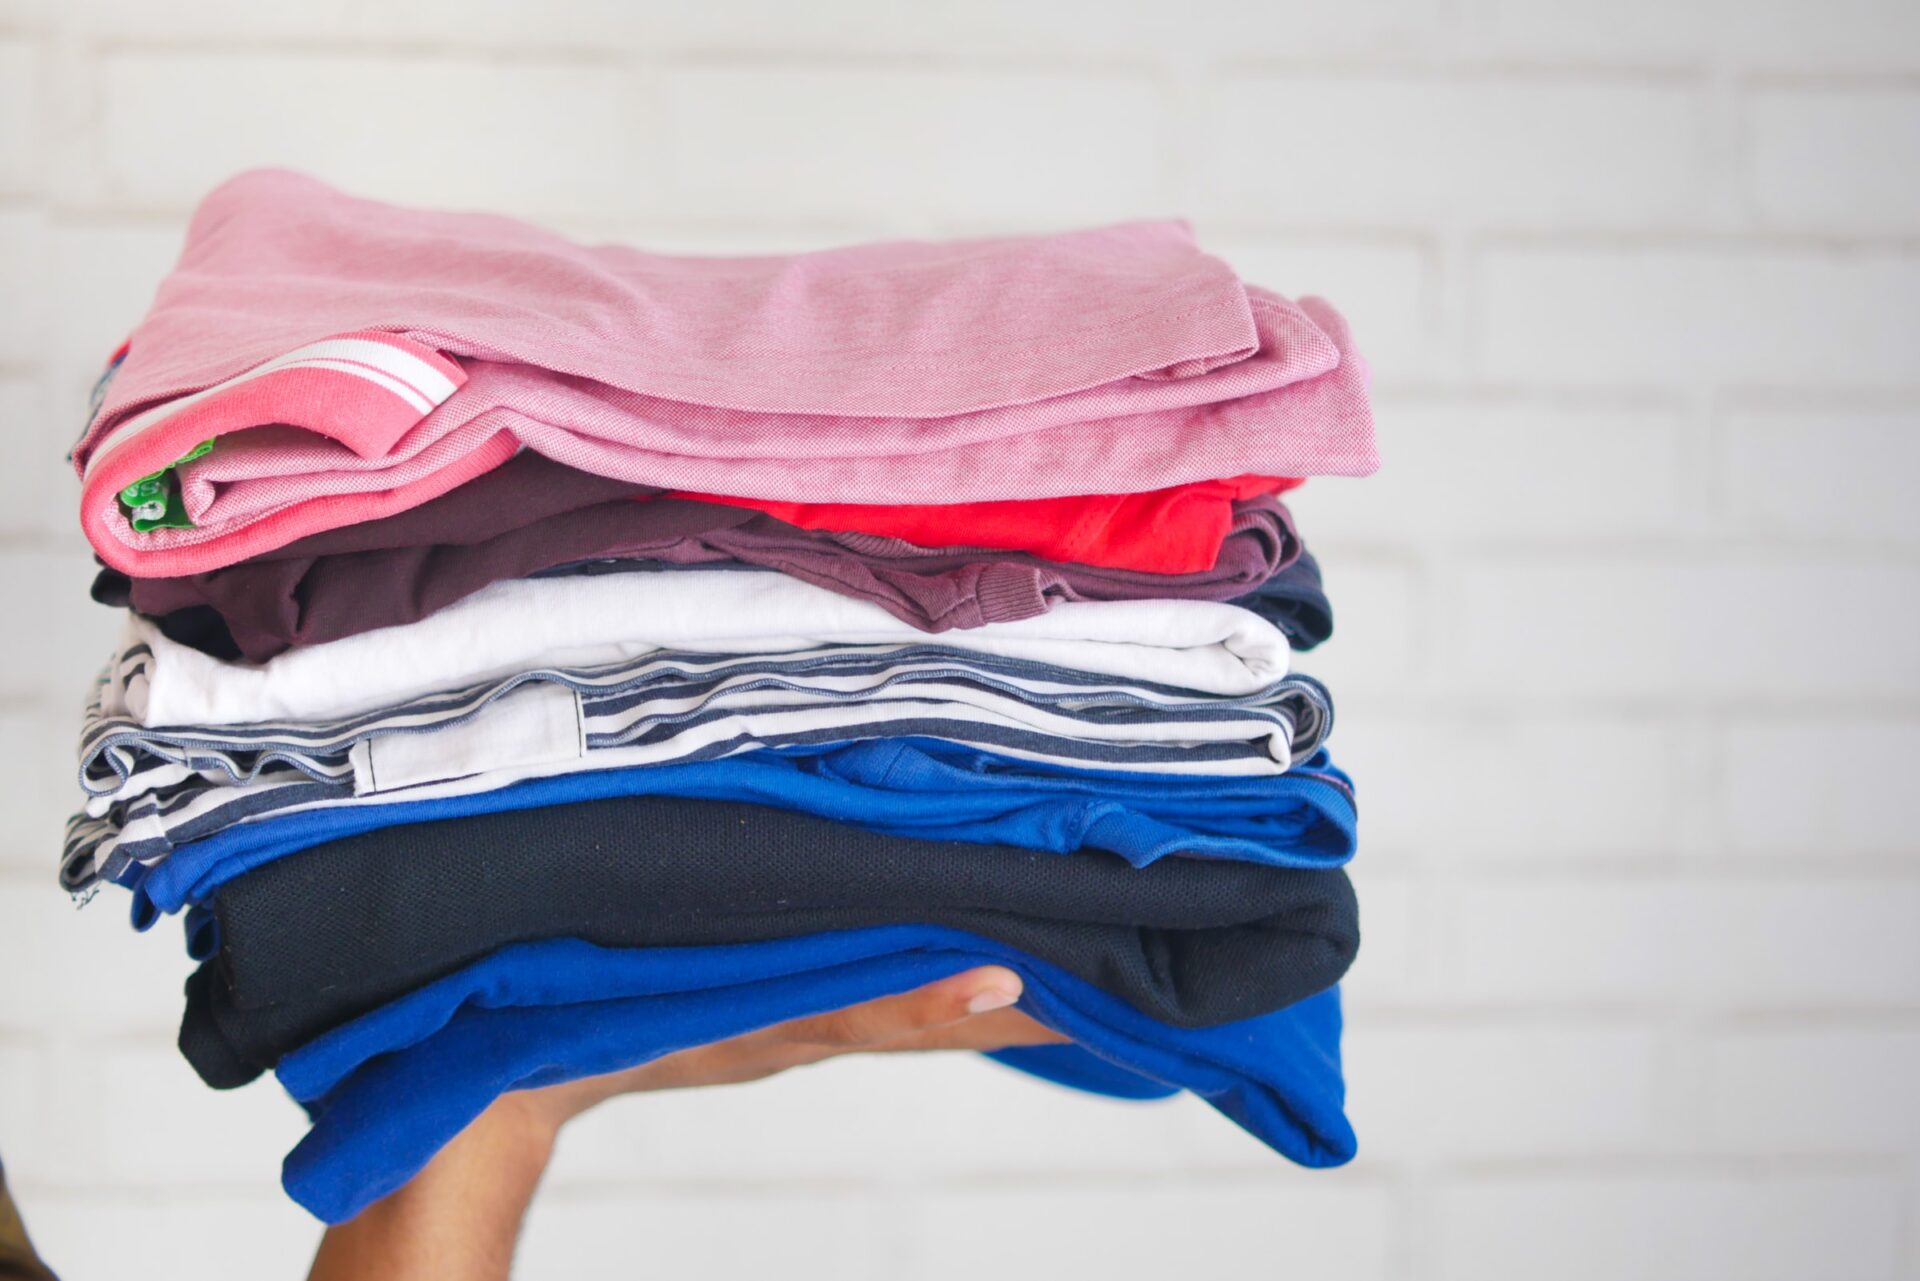 How to Remove Grease Stains from Clothes That Have Already Been Washed